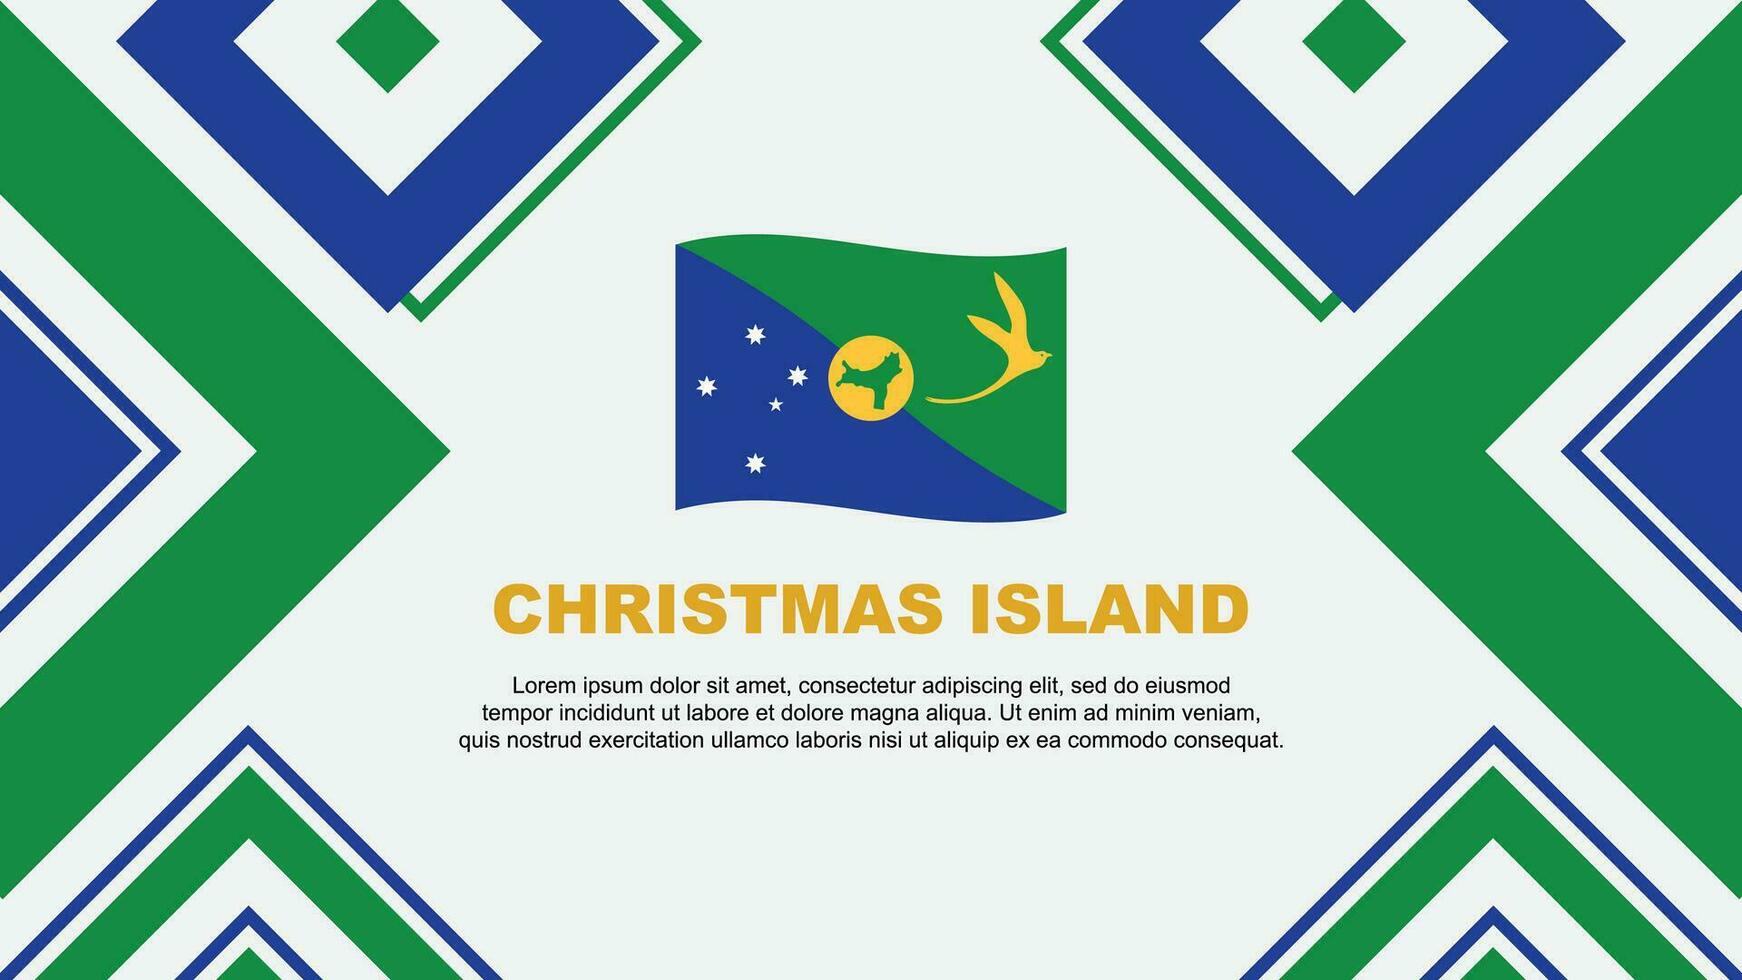 Christmas Island Flag Abstract Background Design Template. Christmas Island Independence Day Banner Wallpaper Vector Illustration. Christmas Island Independence Day